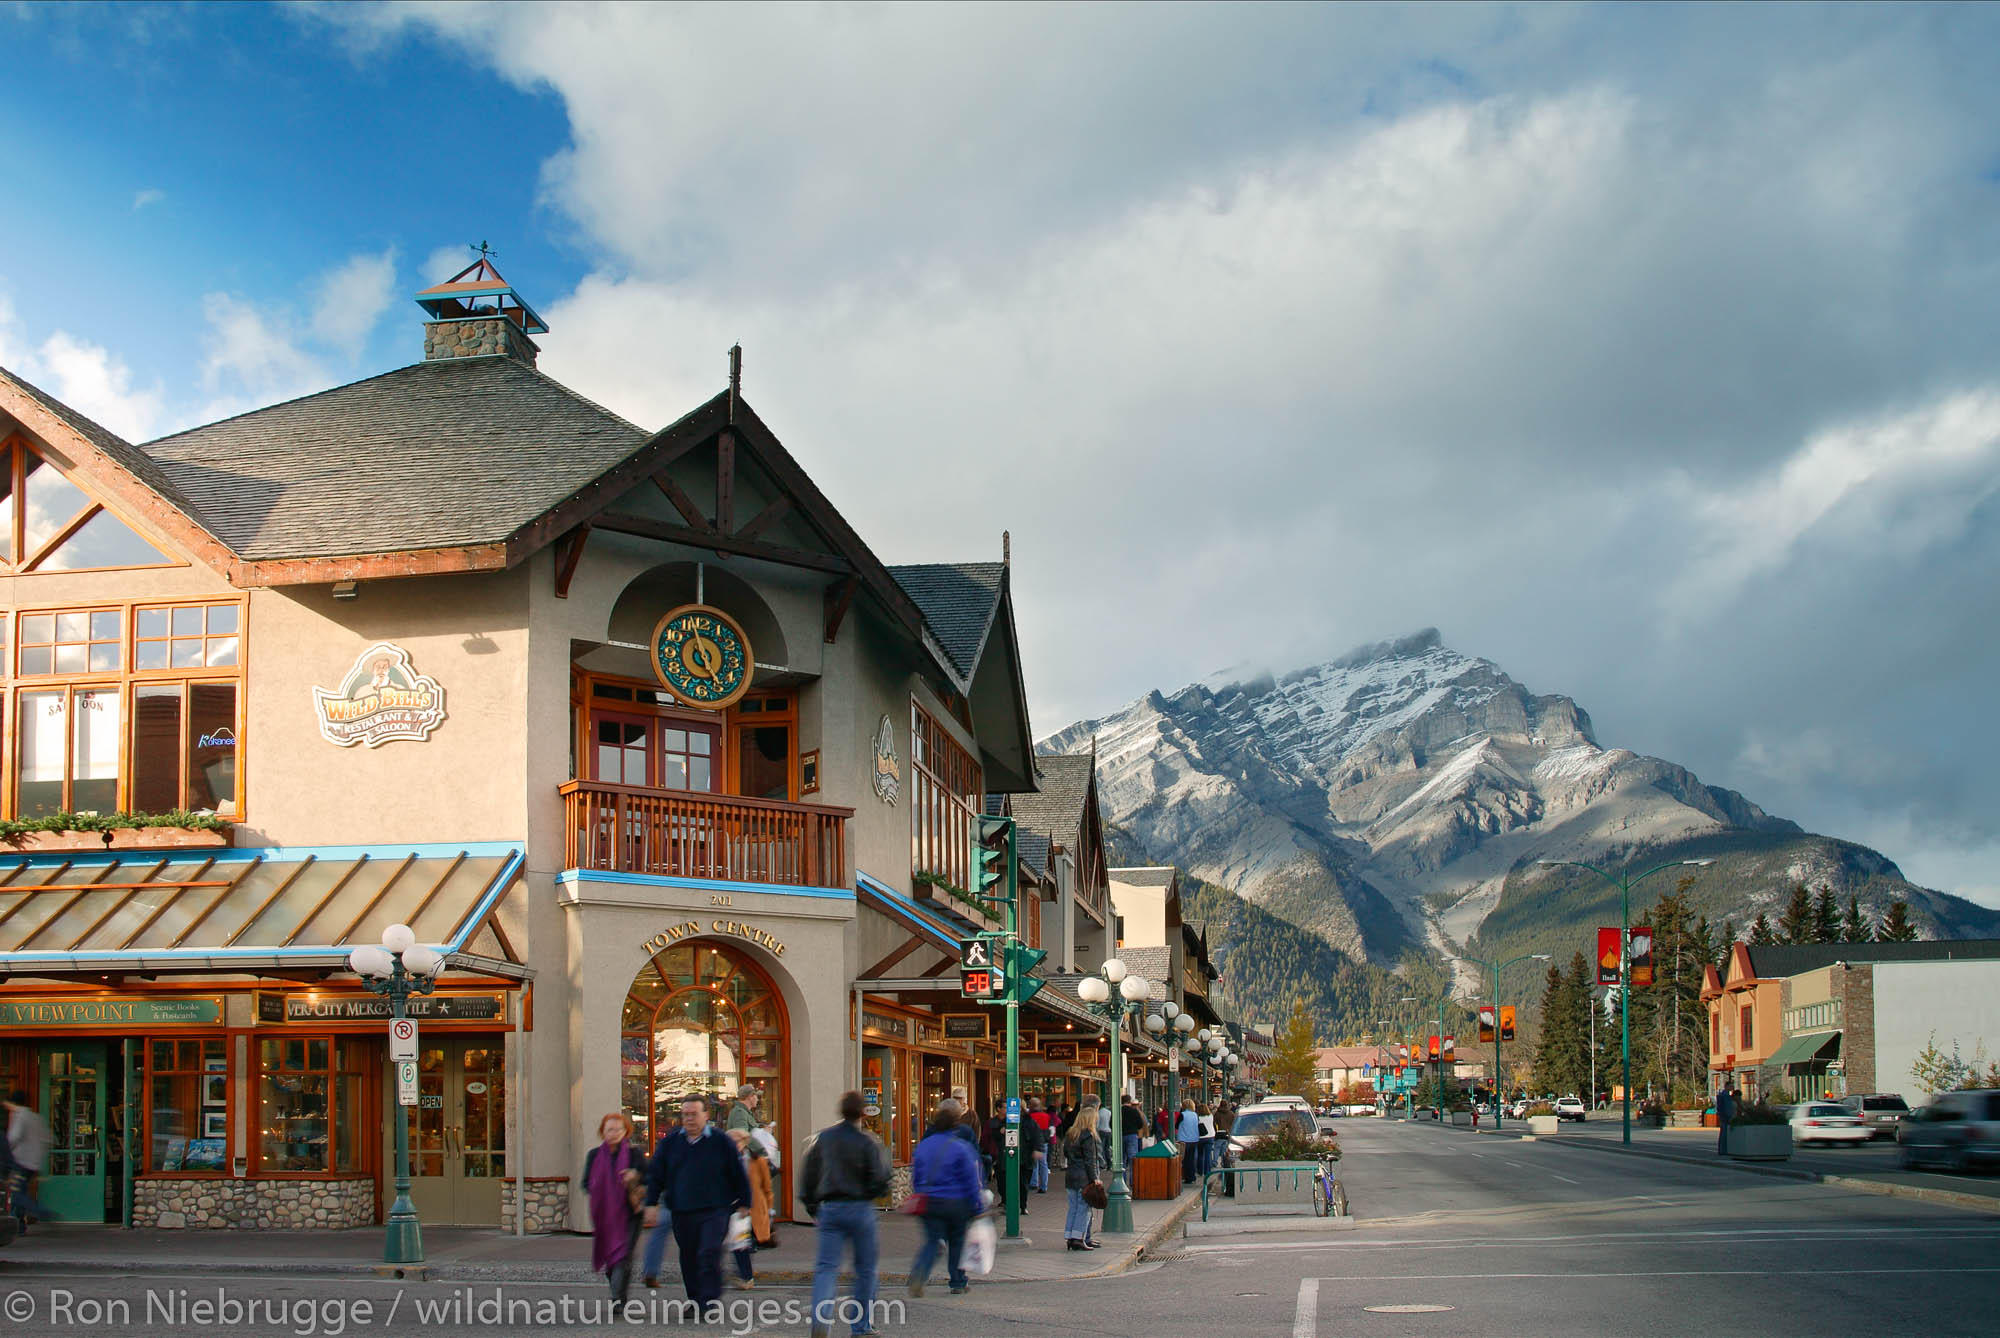 The town of Banff in Banff National Park, Alberta, Canada.